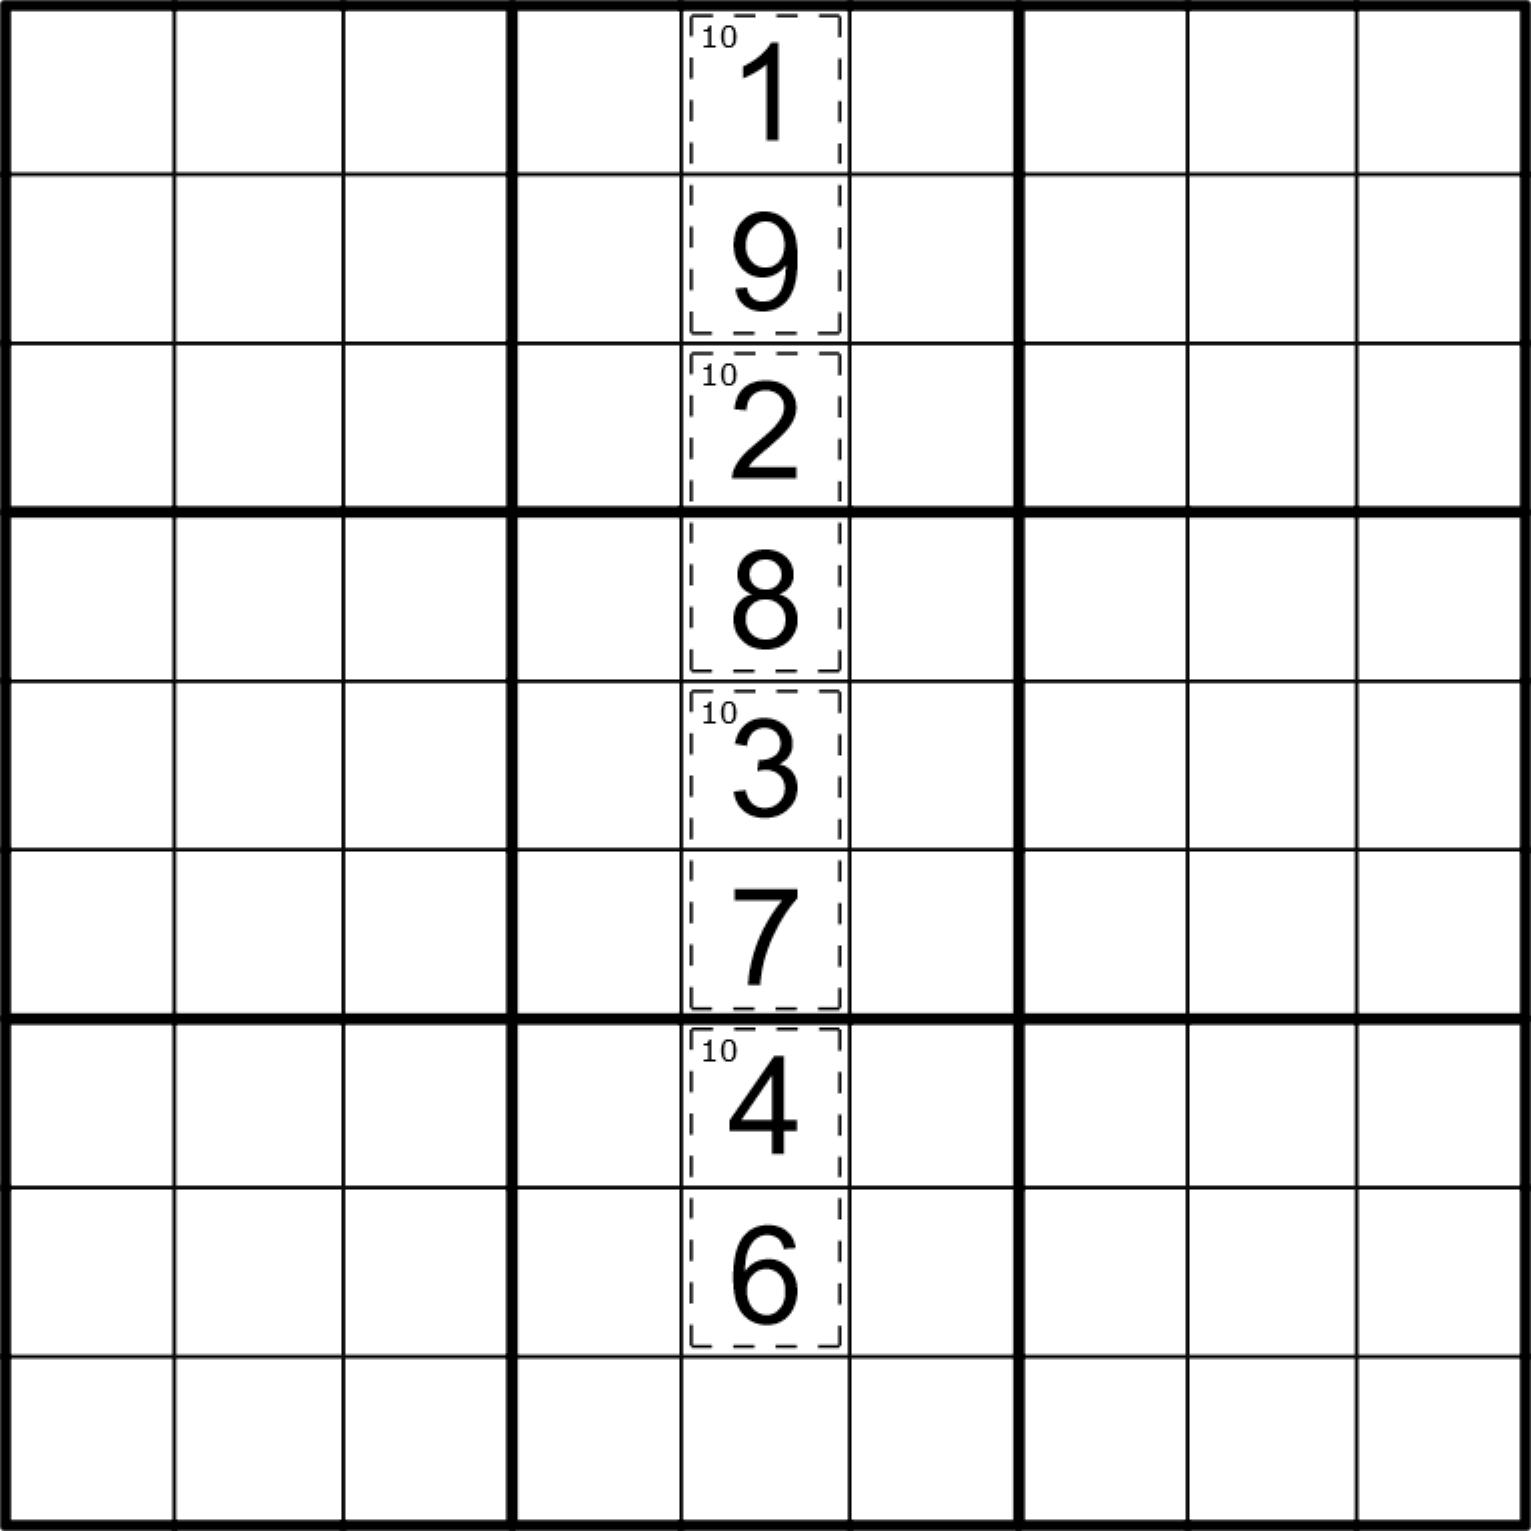 Sudoku grid, all squares empty except for the middle column, column 5, which has 8 rows filled. Each continguous two rows form a killer cage and are marked as grouped together. From top to bottom: first group is a cell with value 1 and a pencil mark indicating a cage sum of 10, cell with value 9. Second group is a cell with value 2 and a pencil mark of 10, cell with value 8. Third group is a cell with value 3 and a pencil mark of 10, cell with value 7. Fourth group is a cell with value 4 and a pencil mark of 10, cell with value 6. The last cell in the column is empty.